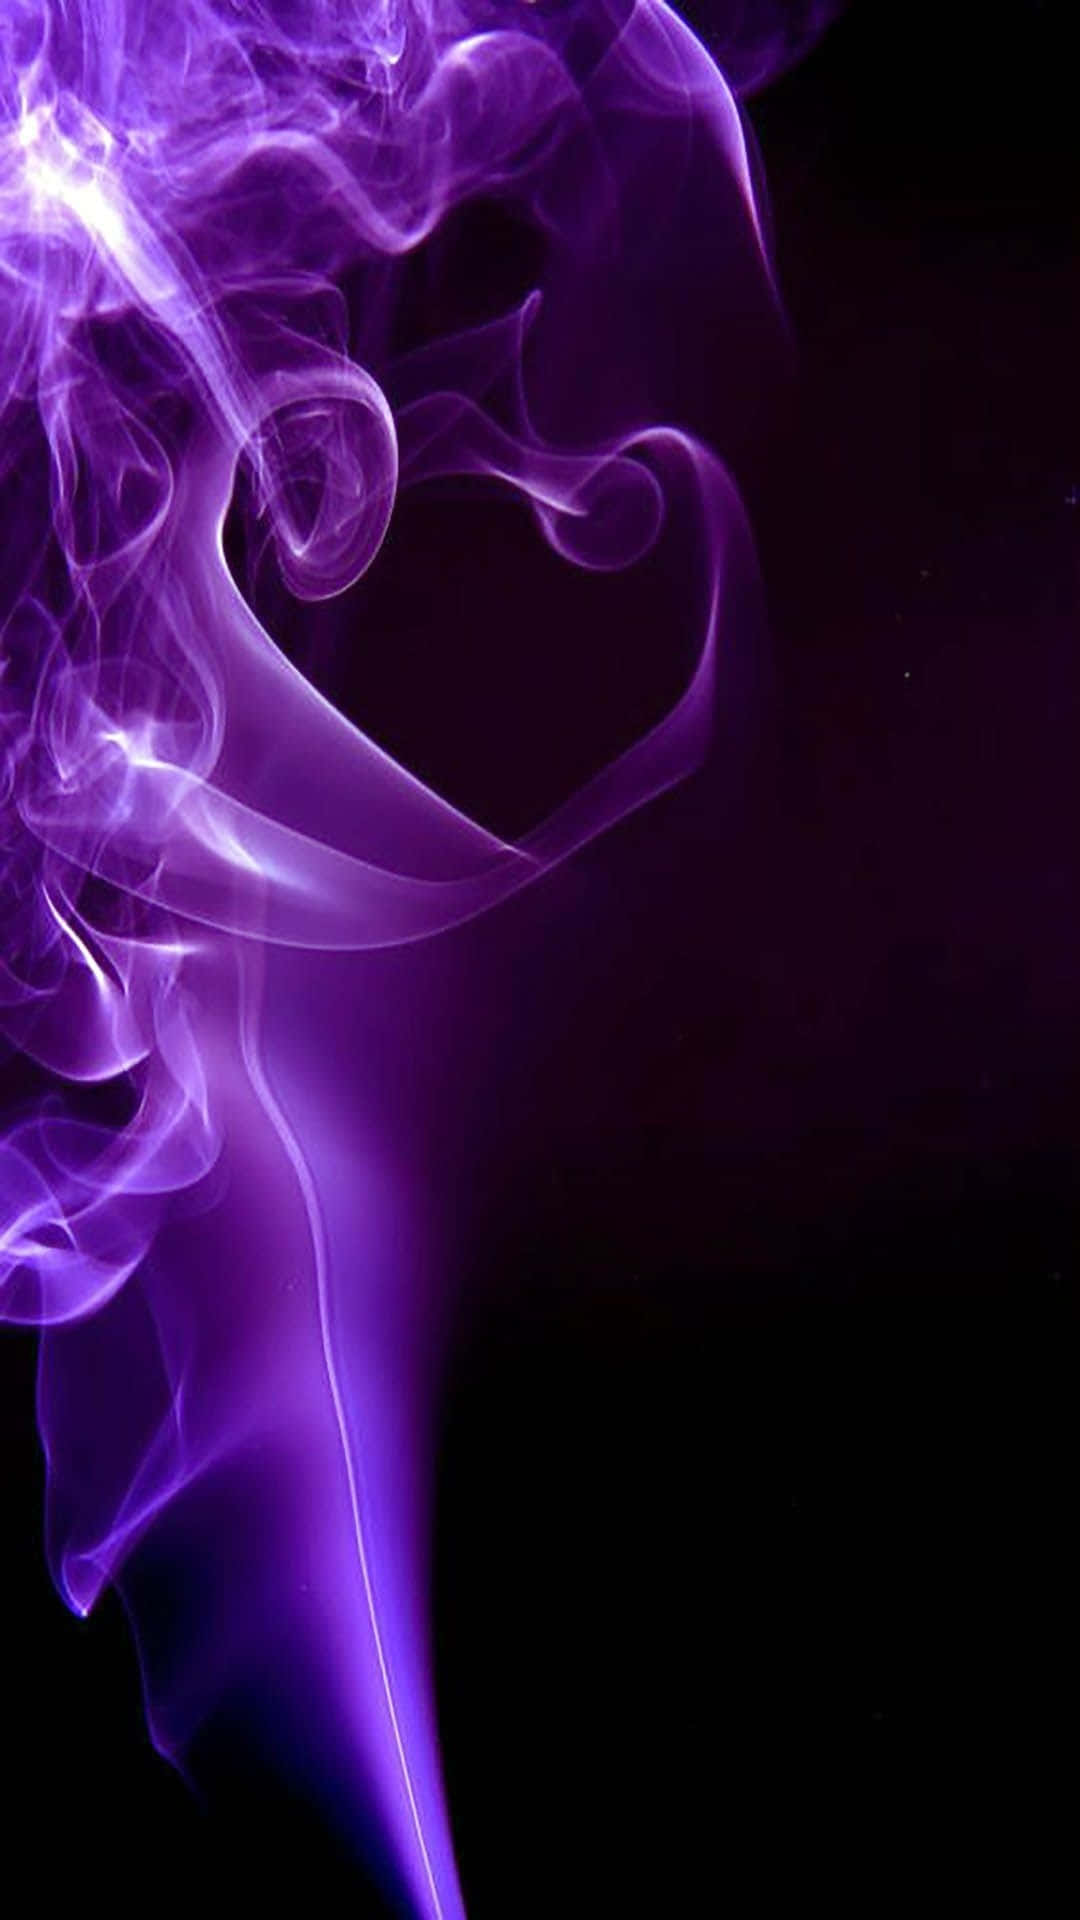 A billowing purple smoke against a dramatic background